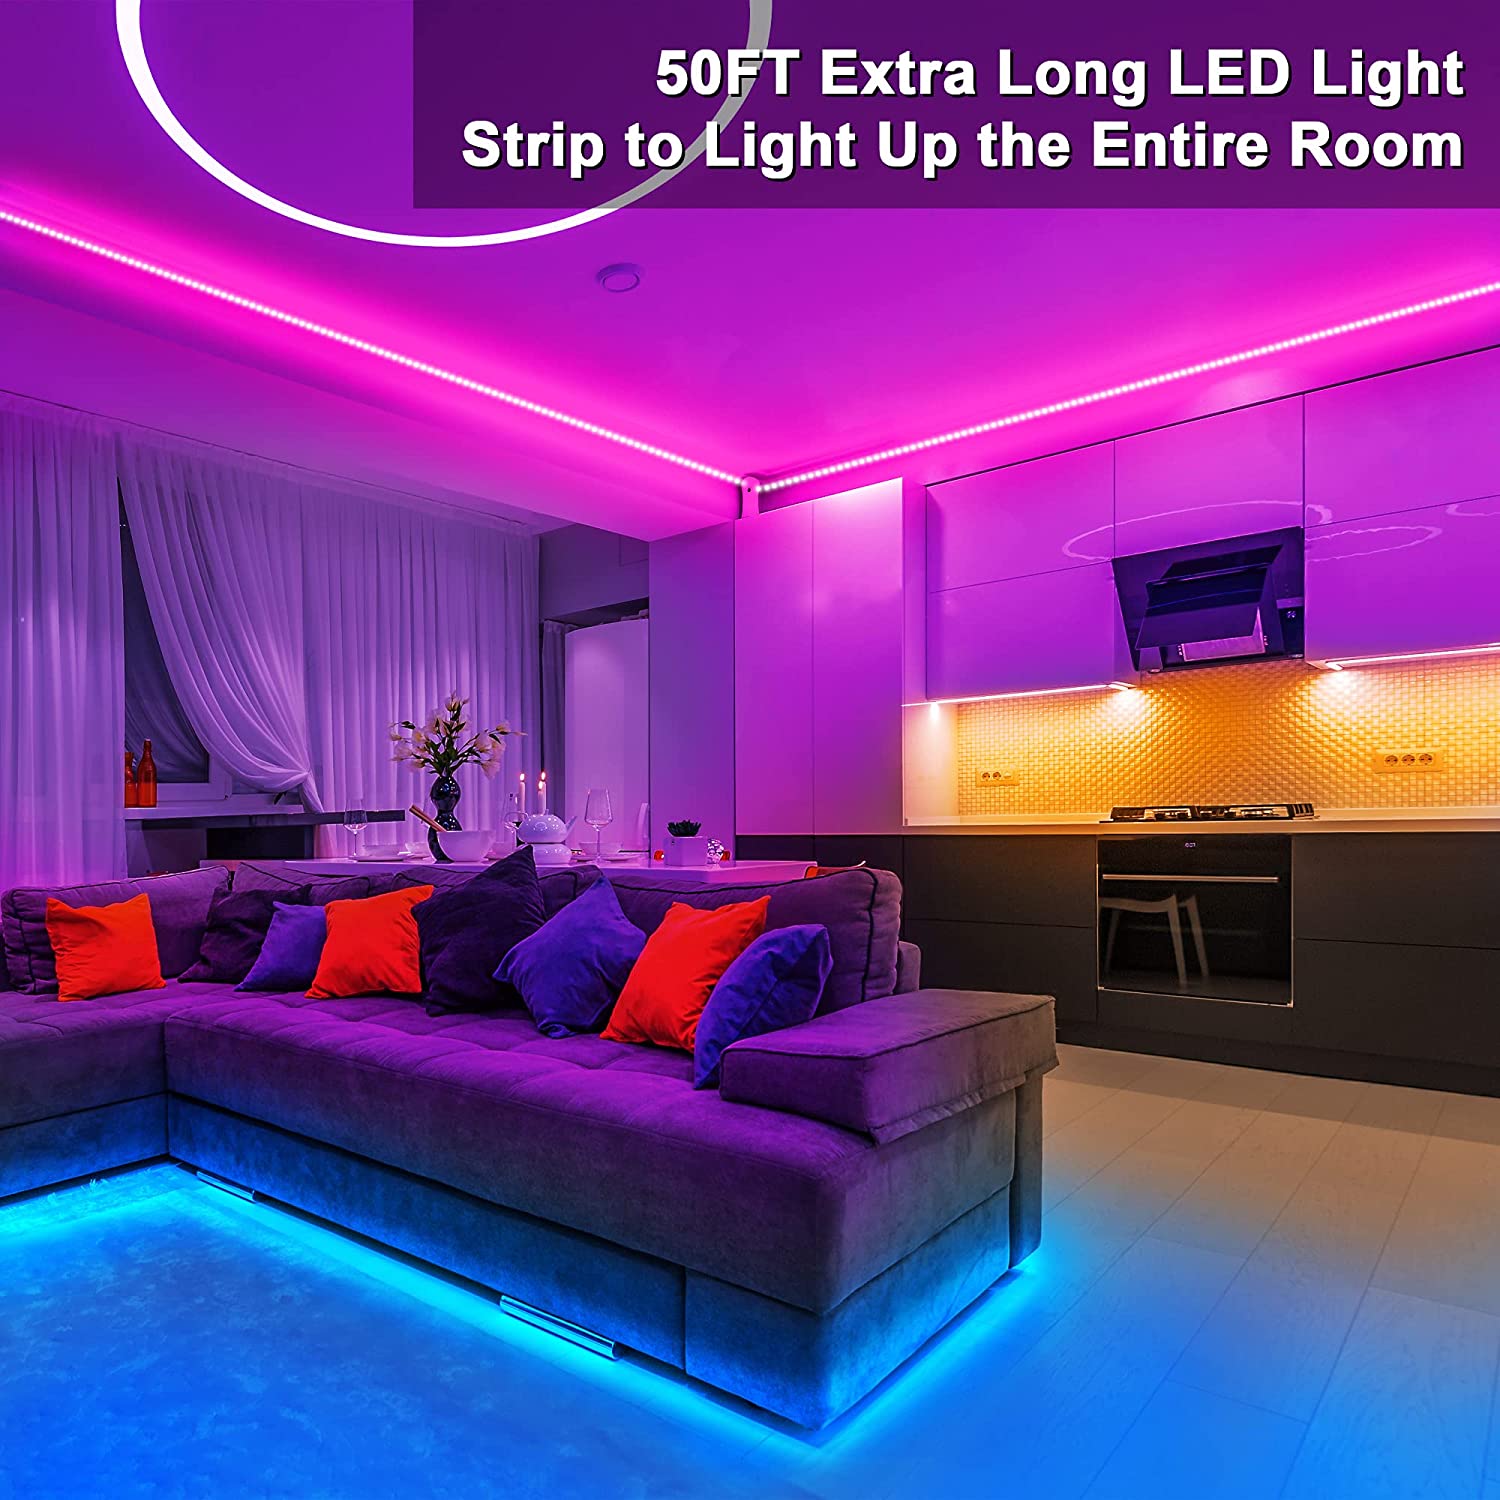 LED Light Strips,15M Music Sync LED Strip Lights with Bluetooth Function,LED Room Lights for Decoration,Color Changing LED Lights Strip for Bedroom,Living Room,Party,Holiday